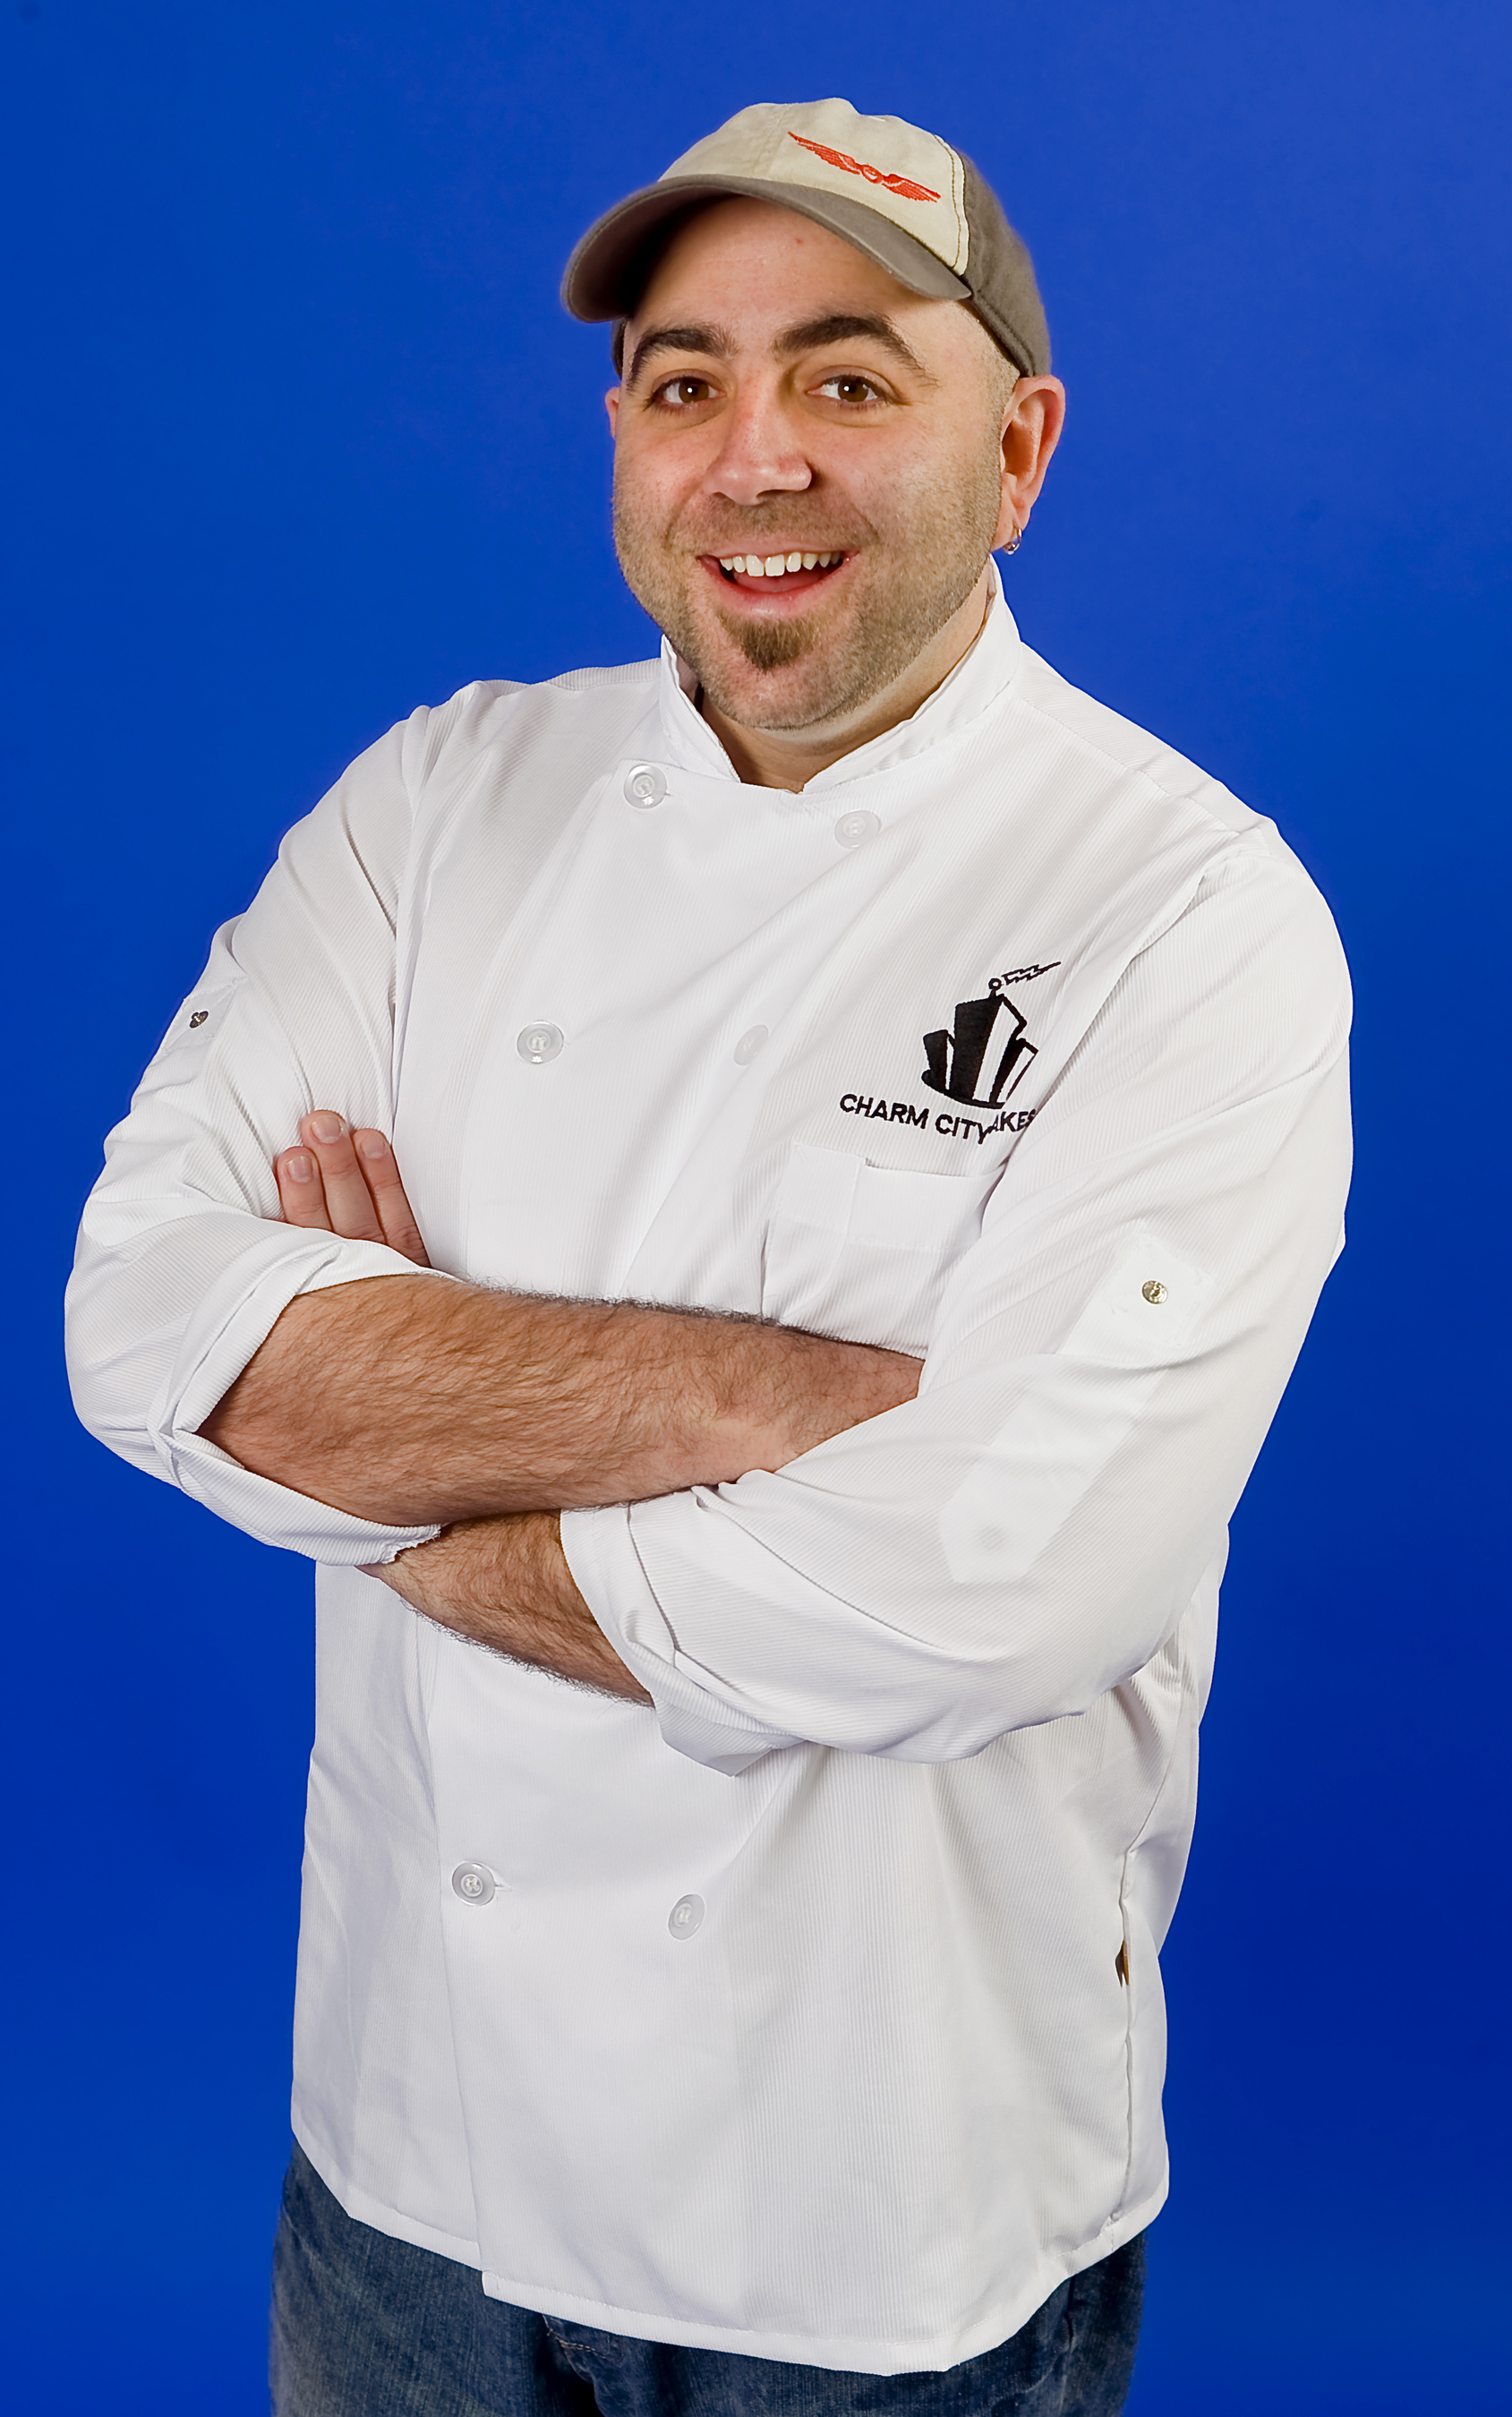 Duff Goldman, star of "Ace of Cakes" and owner of Charm City Cakes. (PRNewsFoto/Resurrection University )